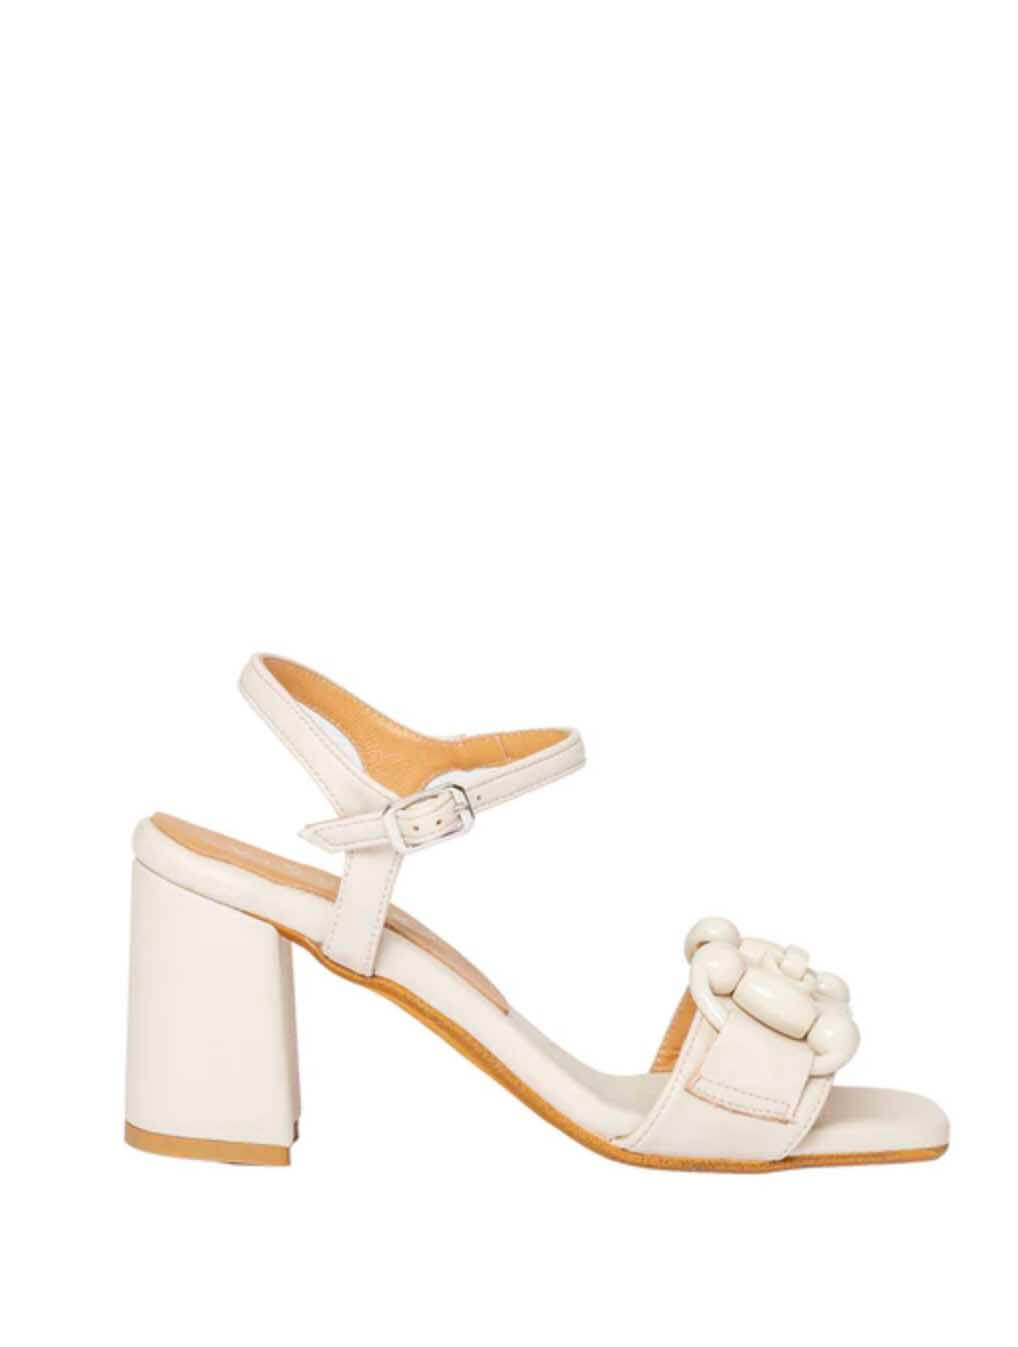 Ateliers Dixie Heeled Sandal in Off-White